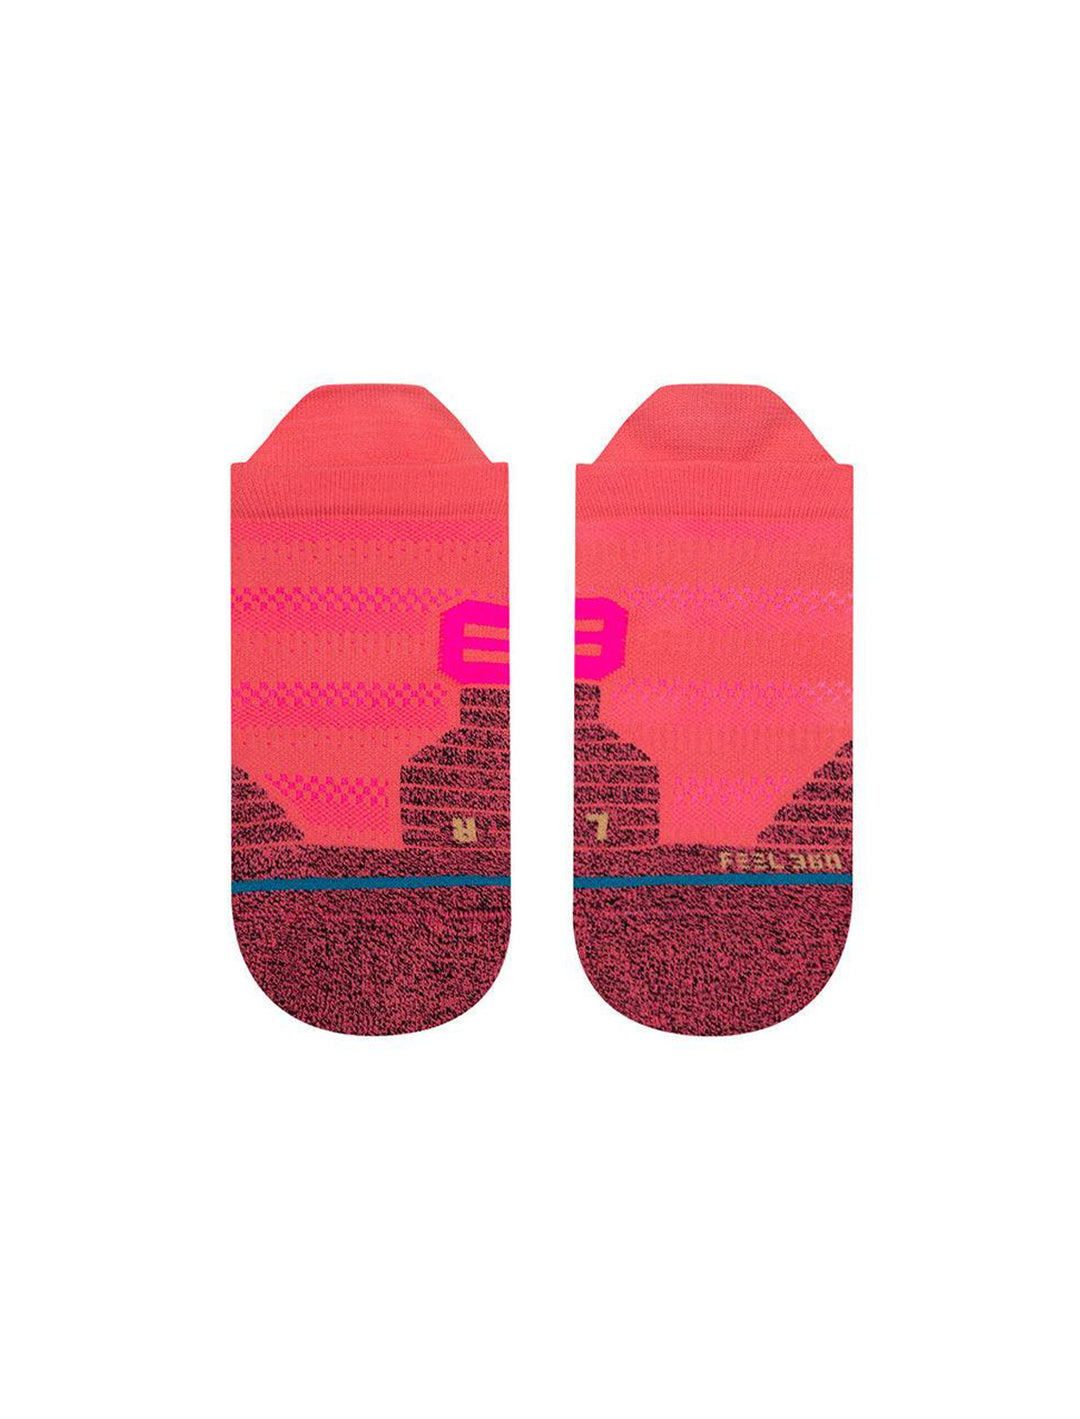 Overhead view of Stance's crossover tab socks in coral.